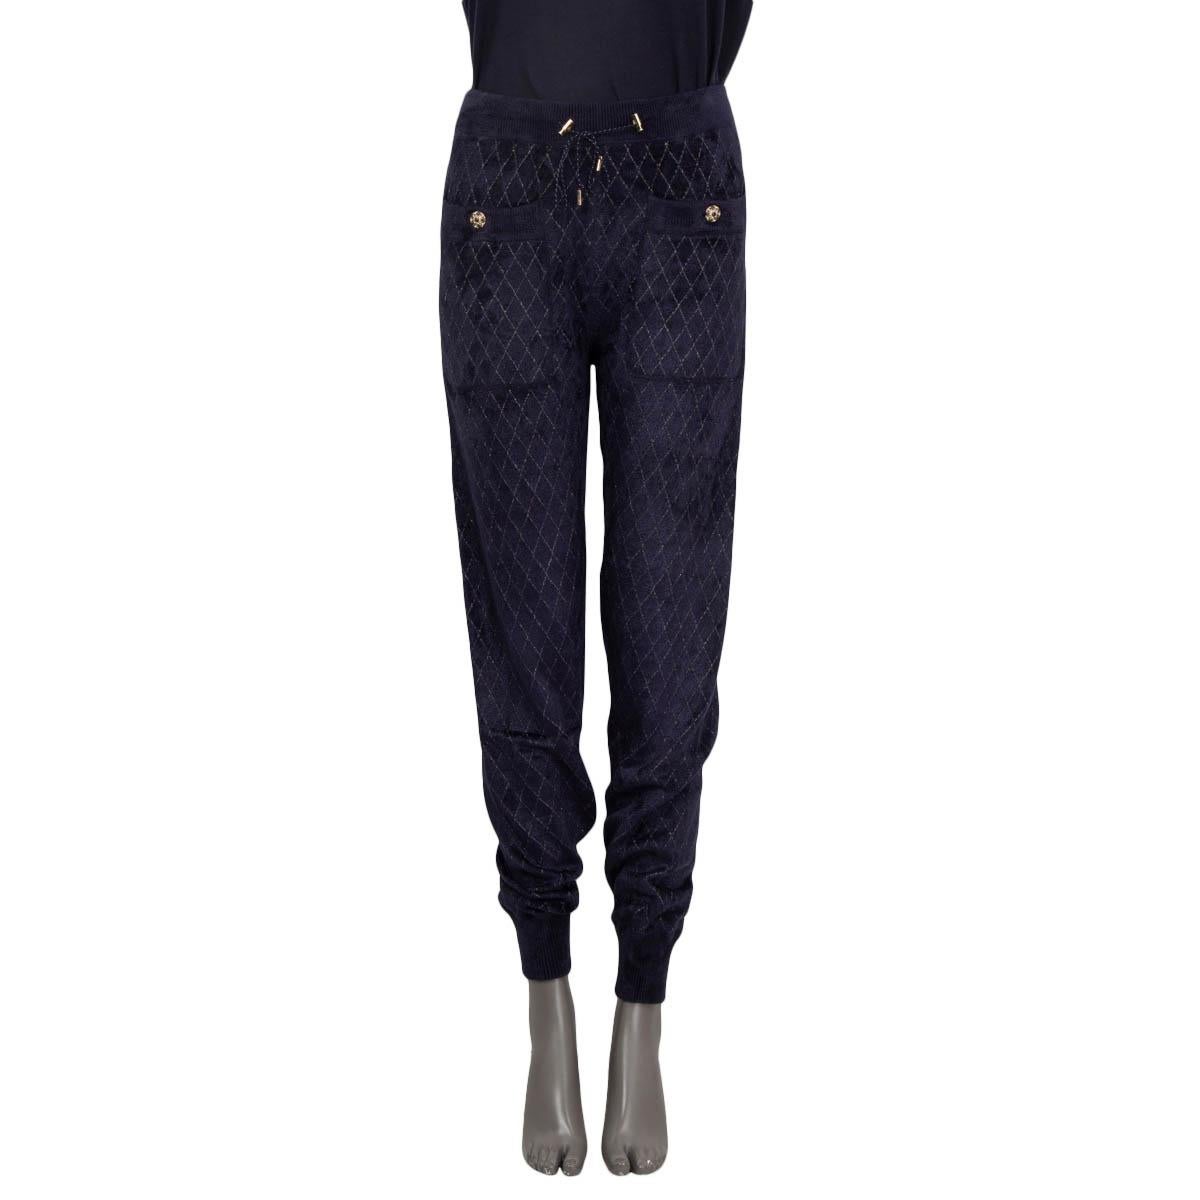 100% authentic Chanel Pre-Fall 2019 jogging pants in midnight blue and gold viscose, polyamide and polyester (please note that tag is missing). Features two buttoned pockets on the front. Have been worn and are in excellent condition. Matching